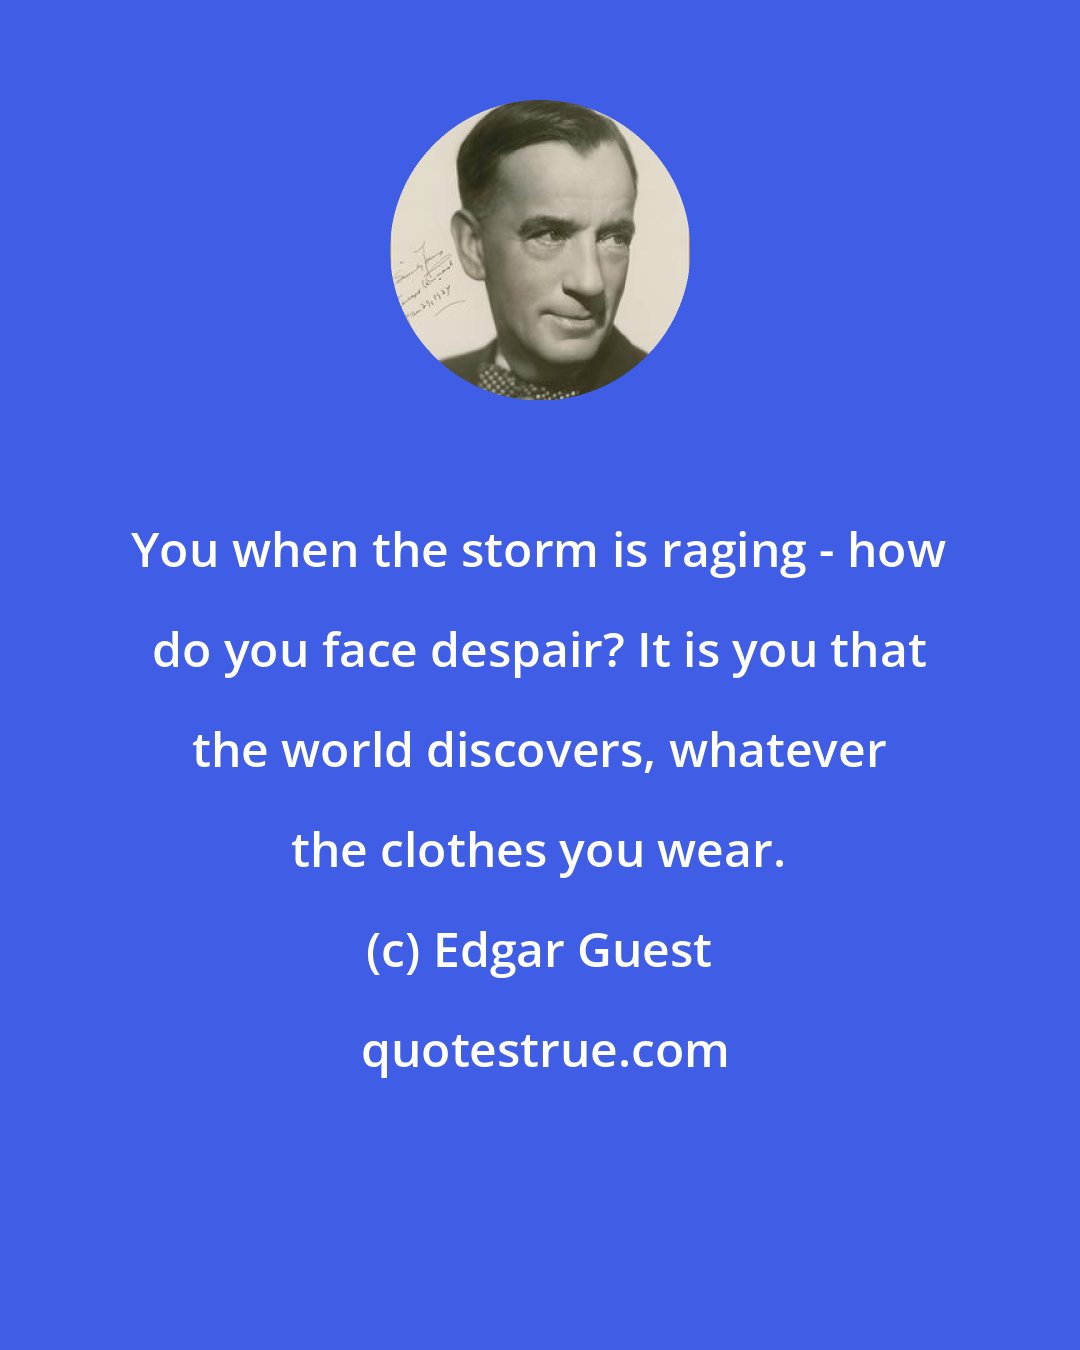 Edgar Guest: You when the storm is raging - how do you face despair? It is you that the world discovers, whatever the clothes you wear.